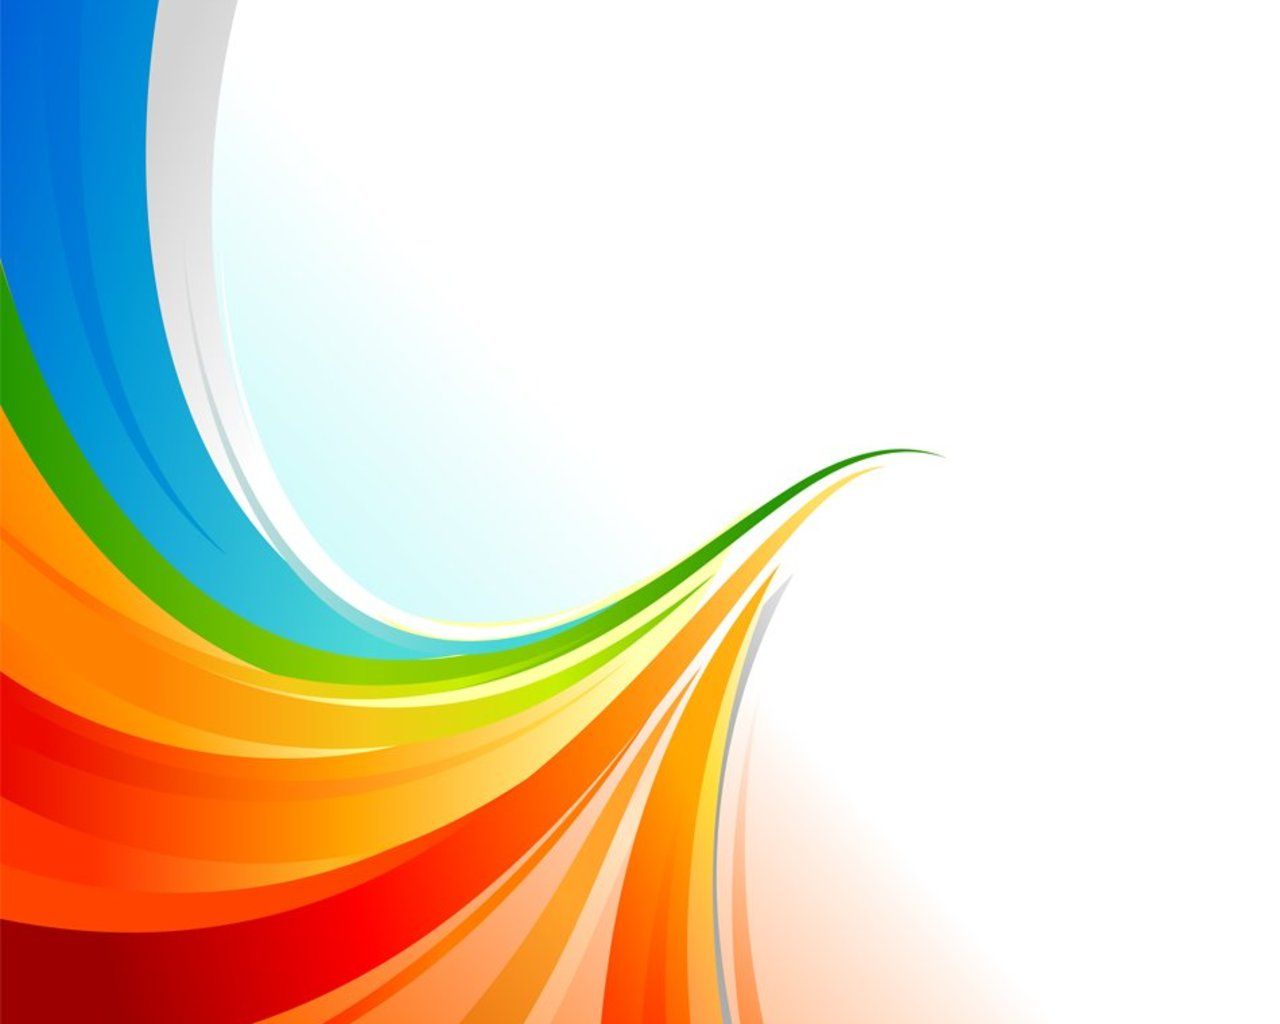 Colored PowerPoint Background. Awsome PowerPoint Background, Awesome PowerPoint Background and Tablet PowerPoint Background